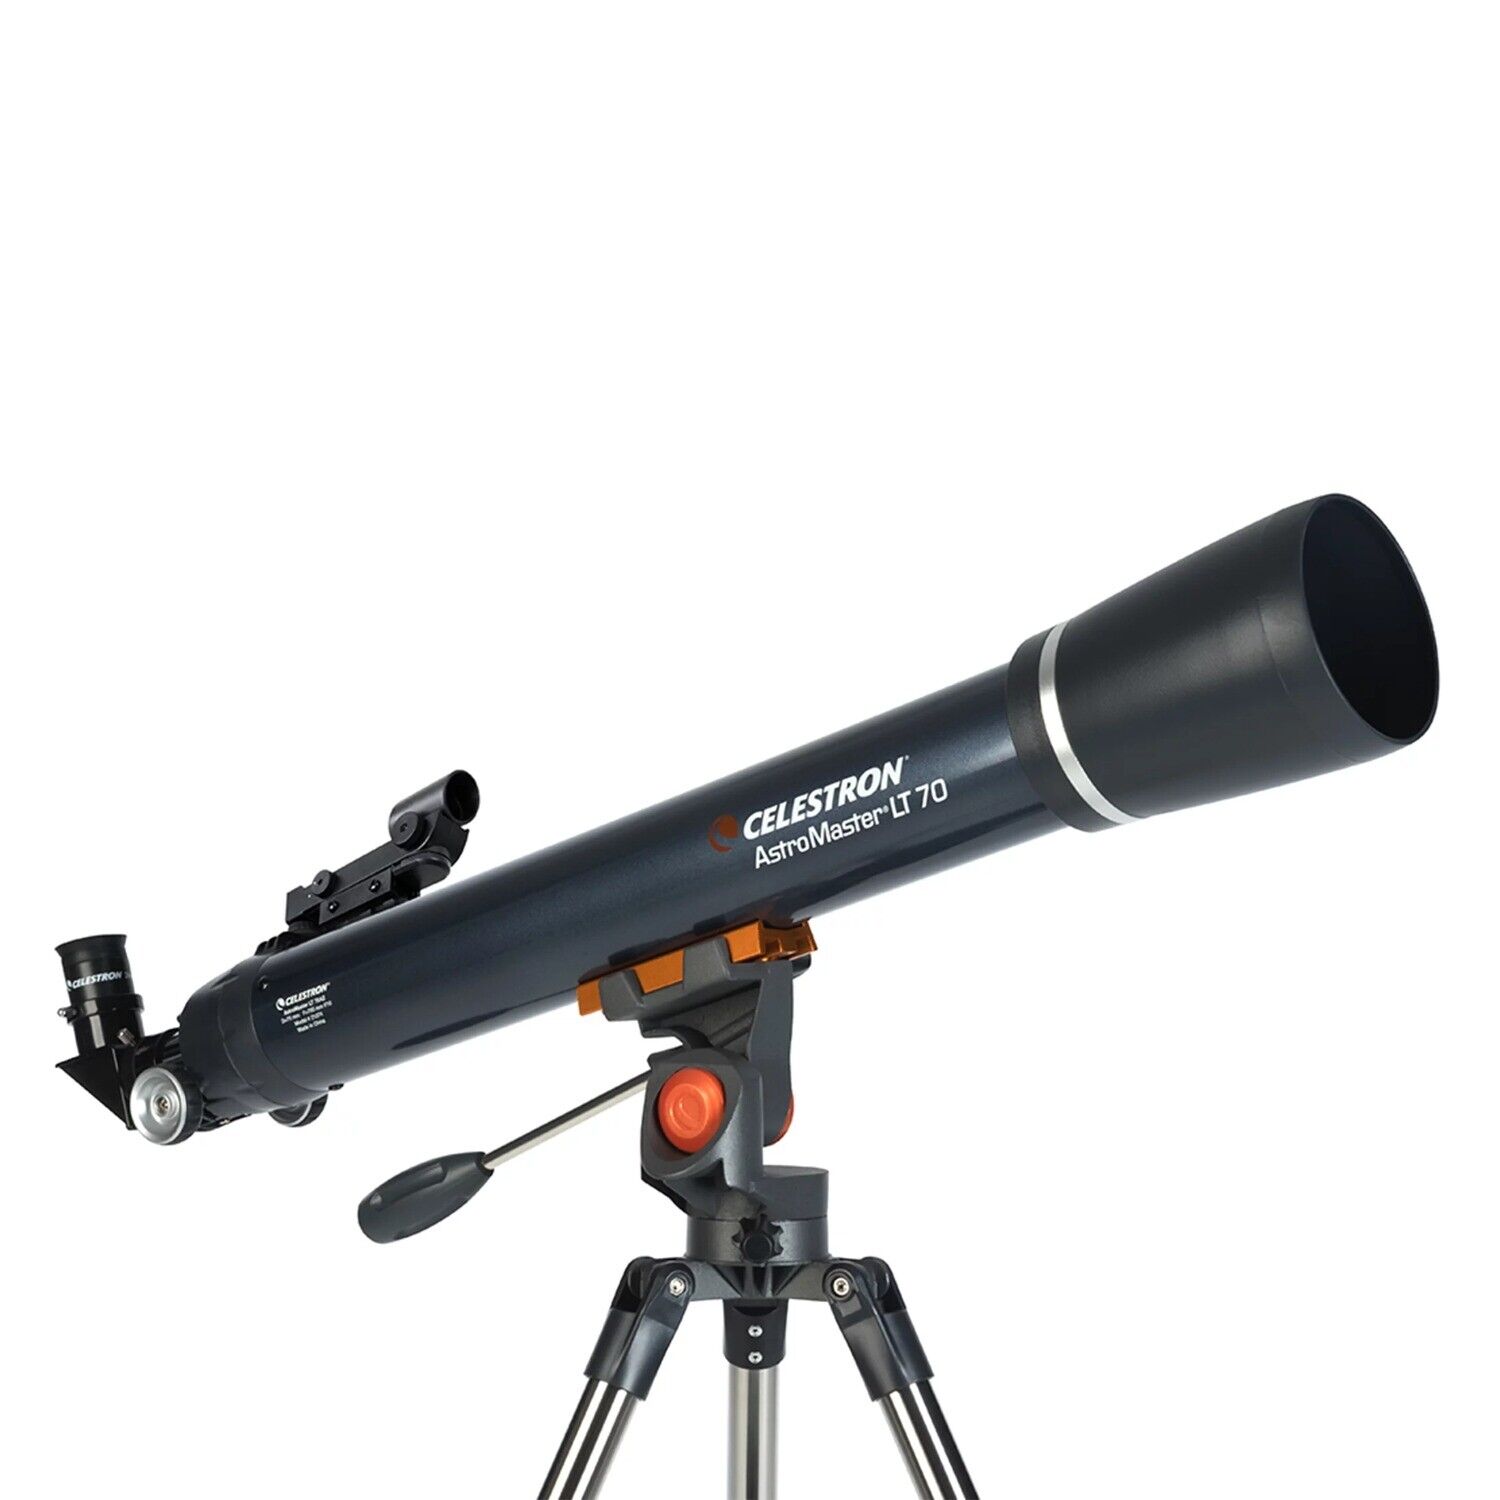 AstroMaster Refractor Telescope Kit with Smartphone Adapter and Bluetooth Remote